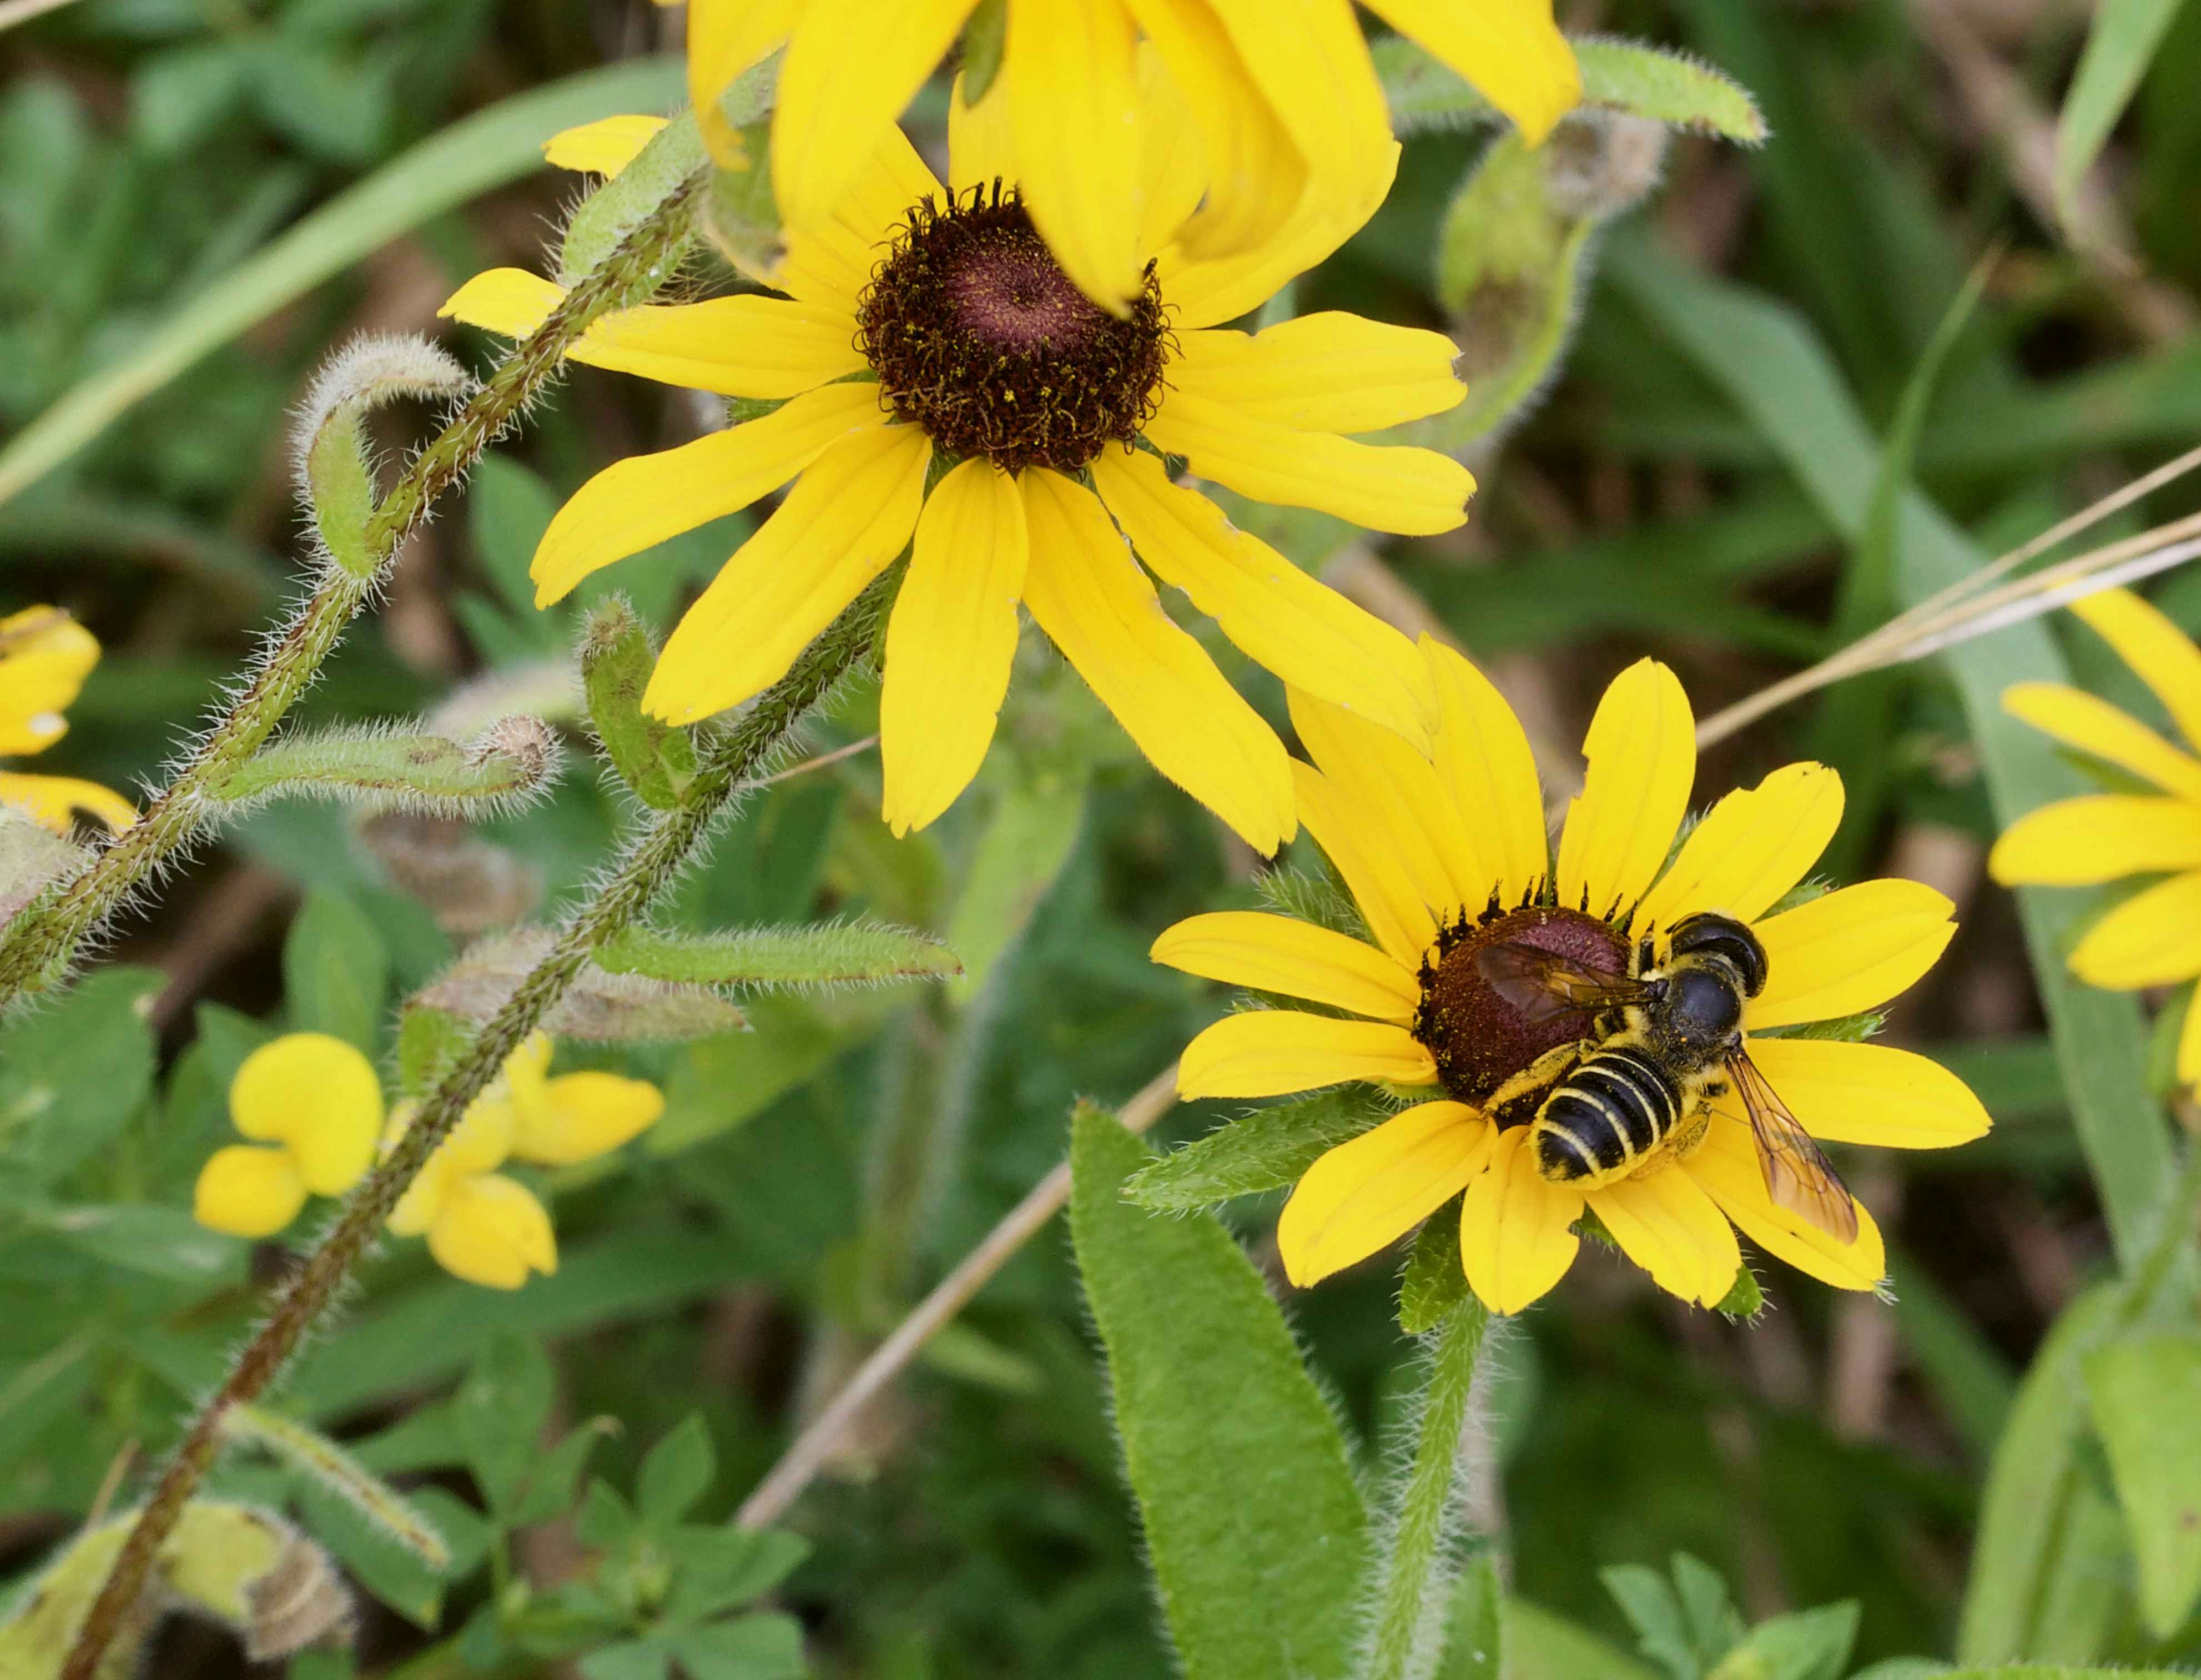 Black-eyed susan flowers with a bumble bee.